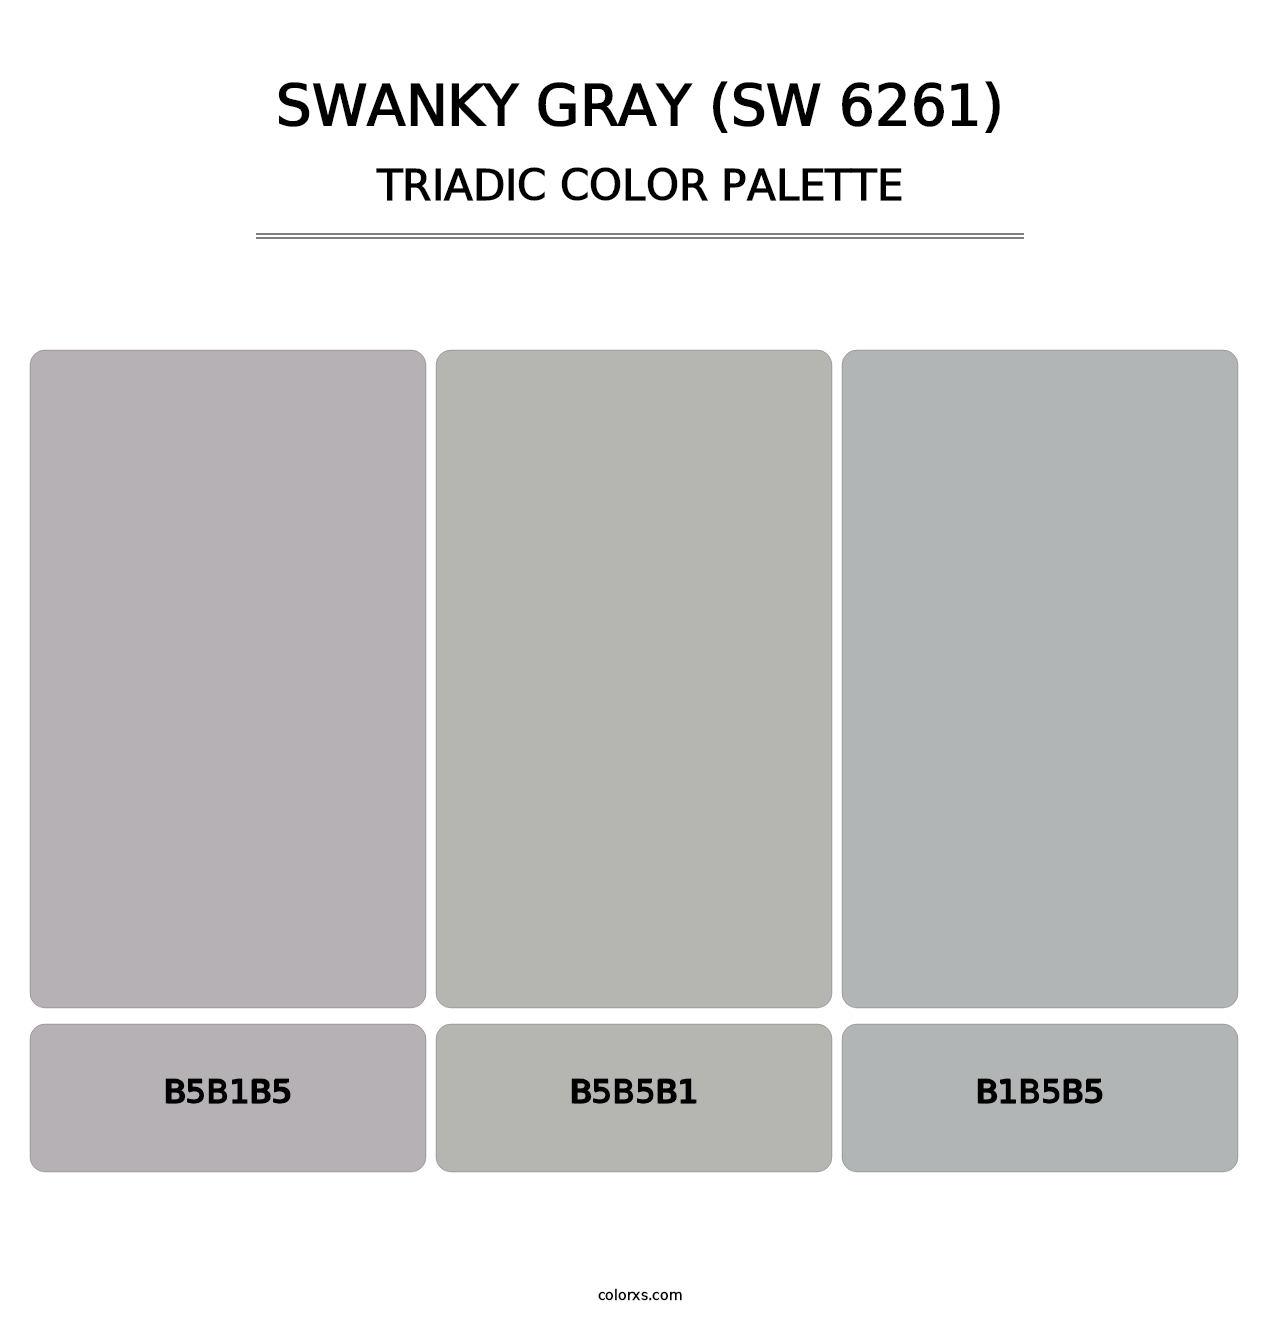 Swanky Gray (SW 6261) - Triadic Color Palette